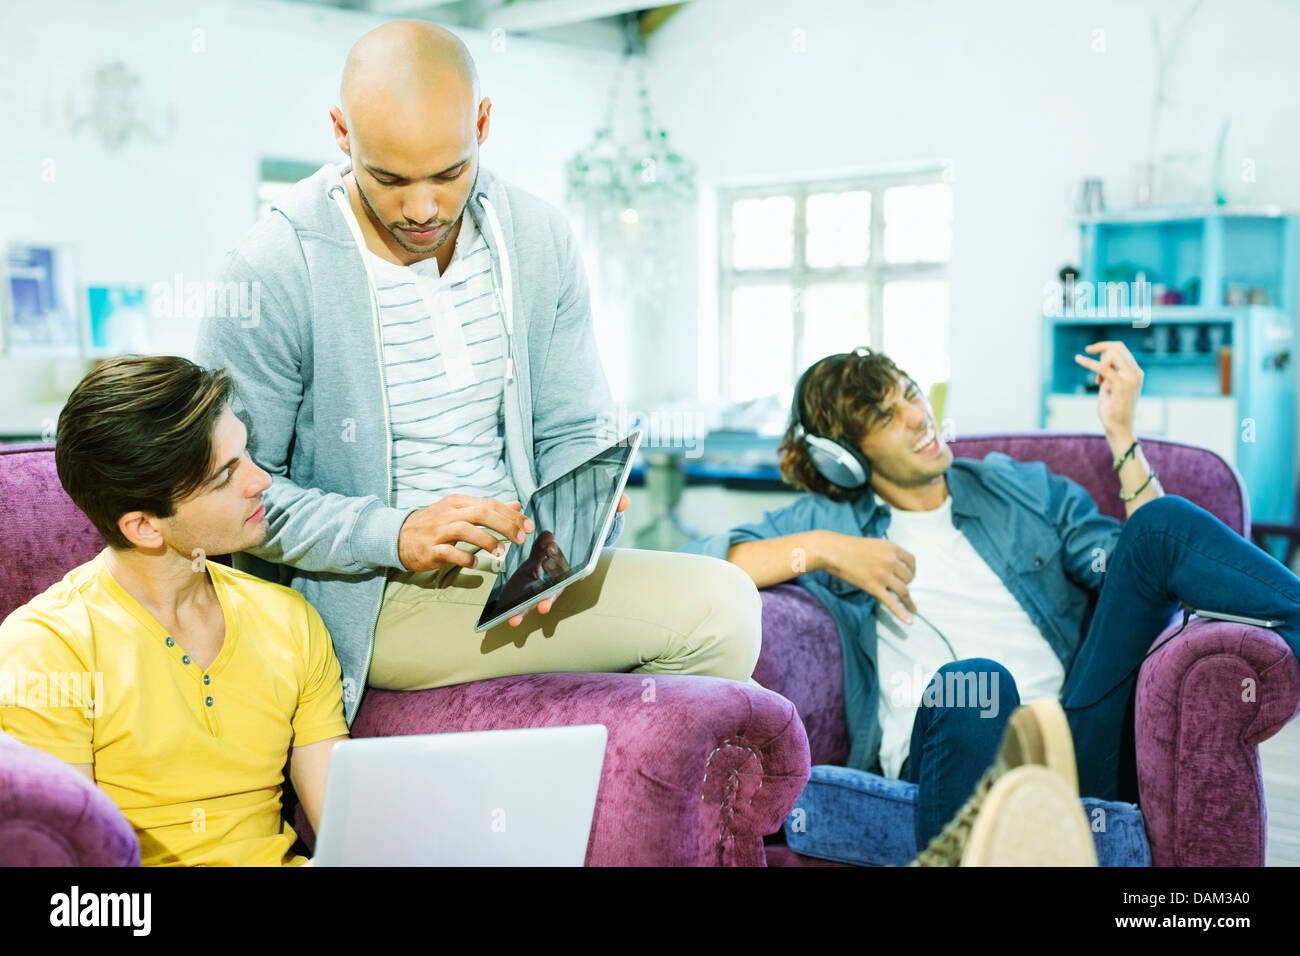 Men relaxing together in living room Stock Photo